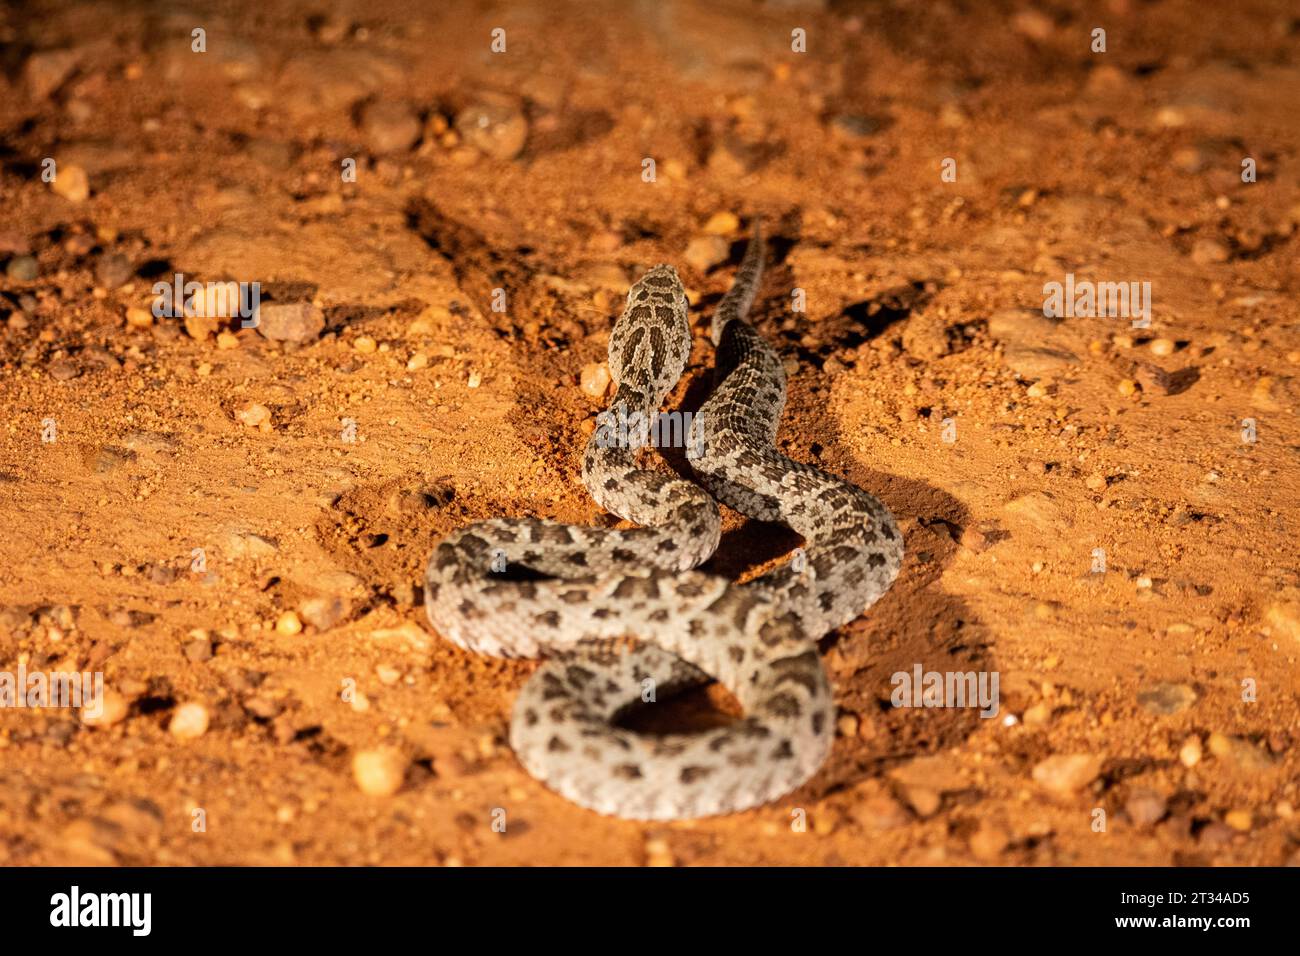 View to Mato Grosso Lance Head snake on the ground in the Pantanal Stock Photo